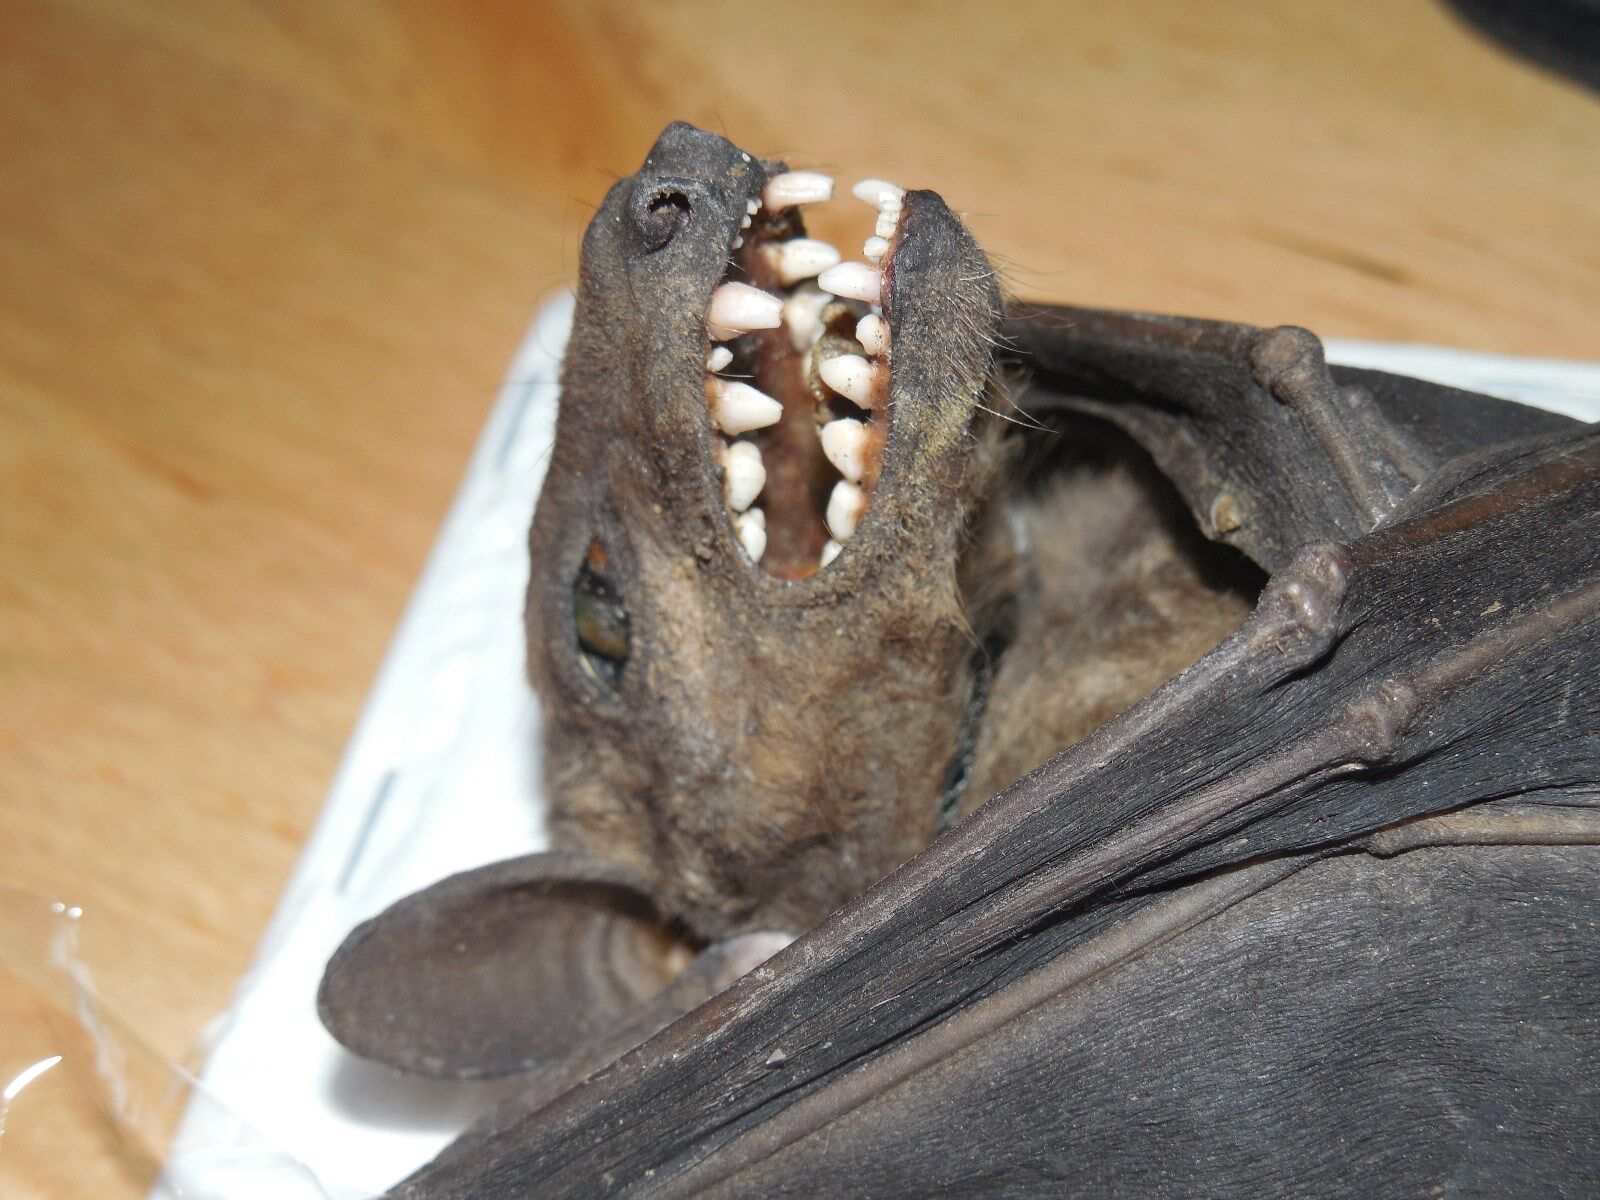 ROUSETTUS LESCHENAULTI REAL HANGING BAT INDONESIAN TAXIDERMY